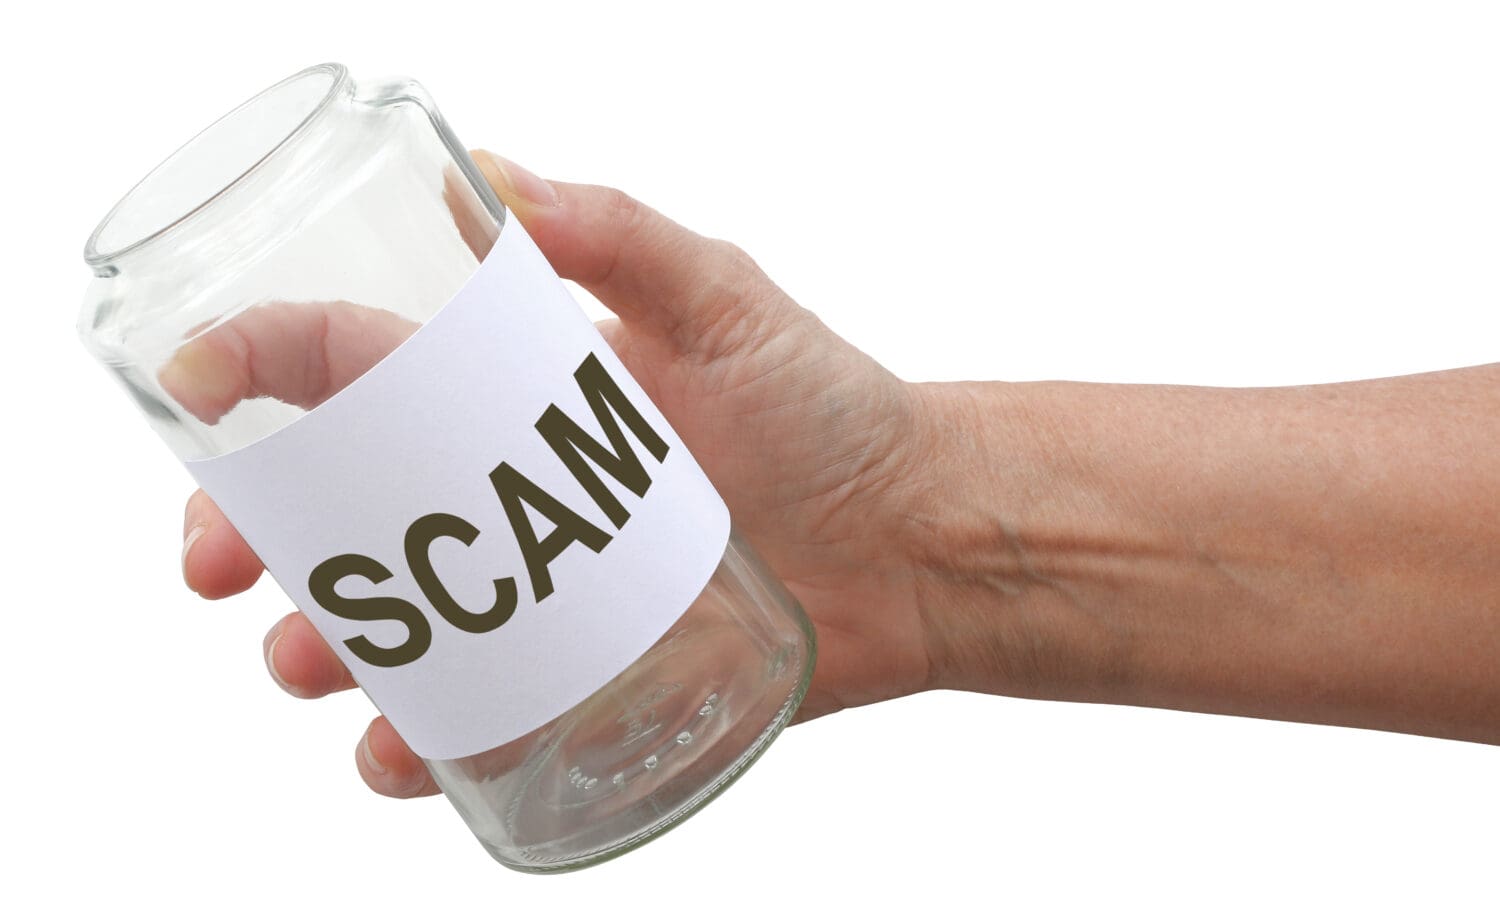 Beware of scammers asking for Money - hand holding a glass jar with a label saying SCAM isolated on a white background